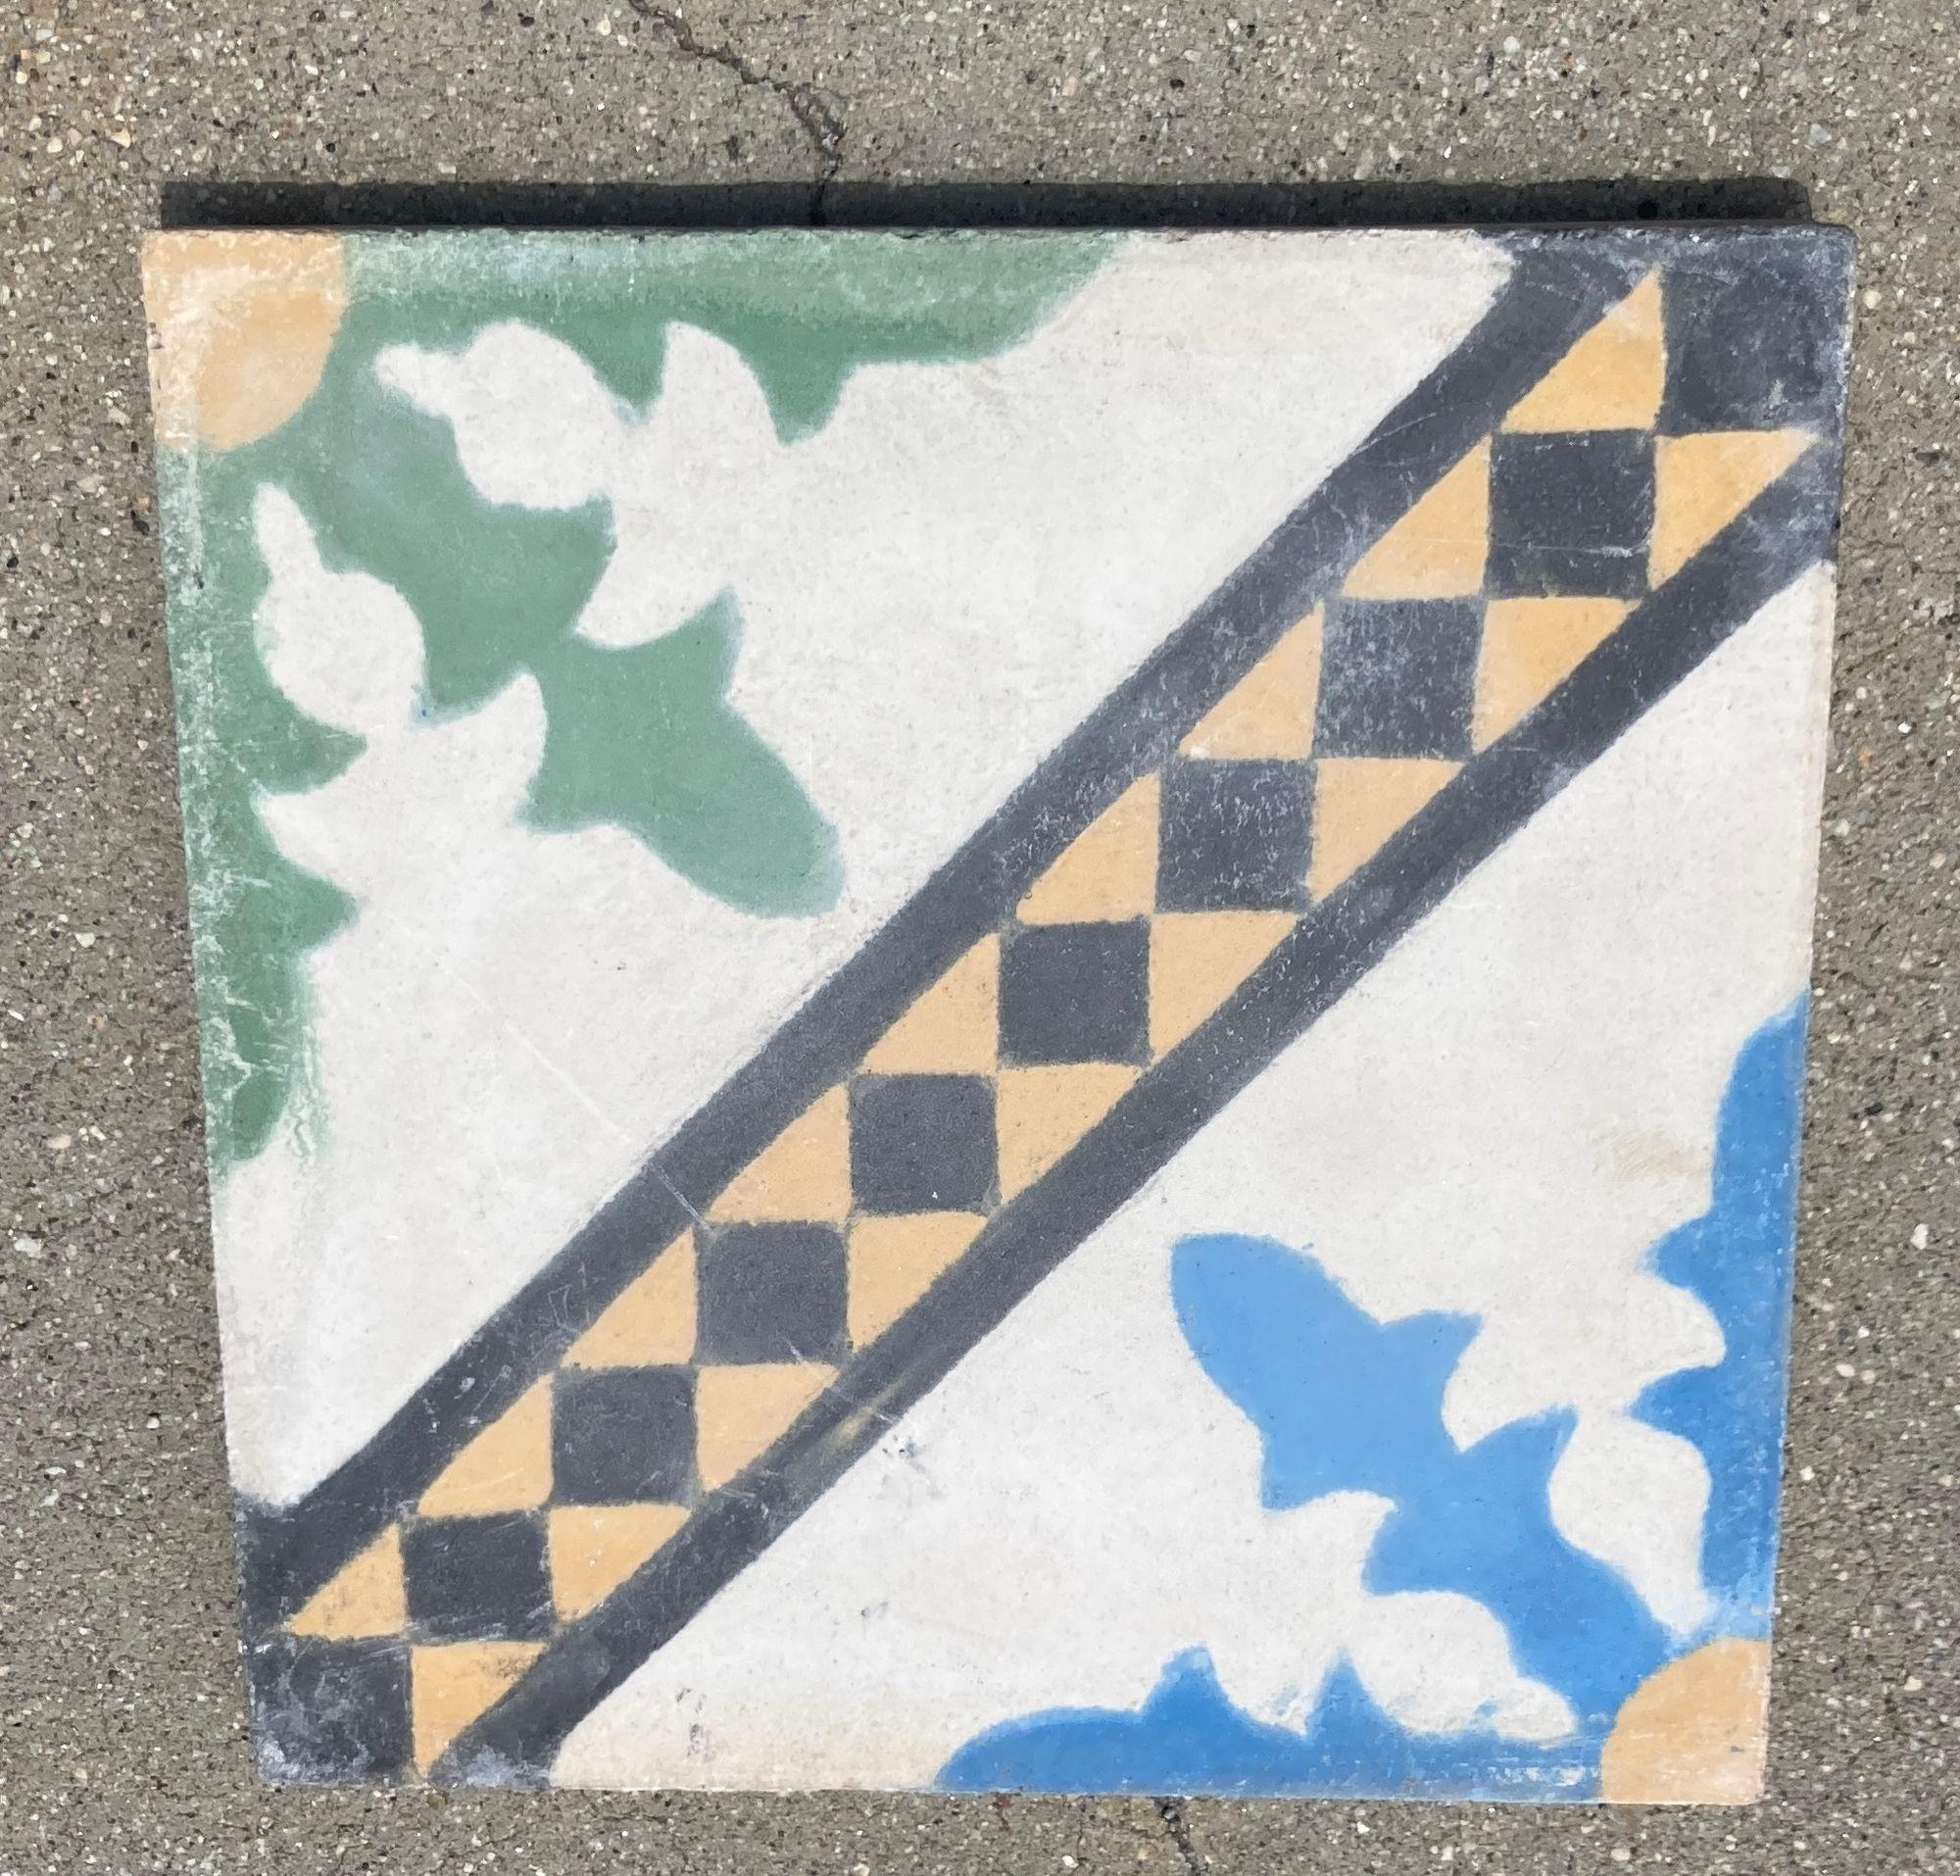 Moroccan Hand-Painted Cement Tile with Traditional Fez Design.Moroccan handcrafted and hand-painted cement tile with traditional Fez design. These are authentic Moroccan encaustic tiles hand made by artisans in Fez, Morocco. This is the traditional